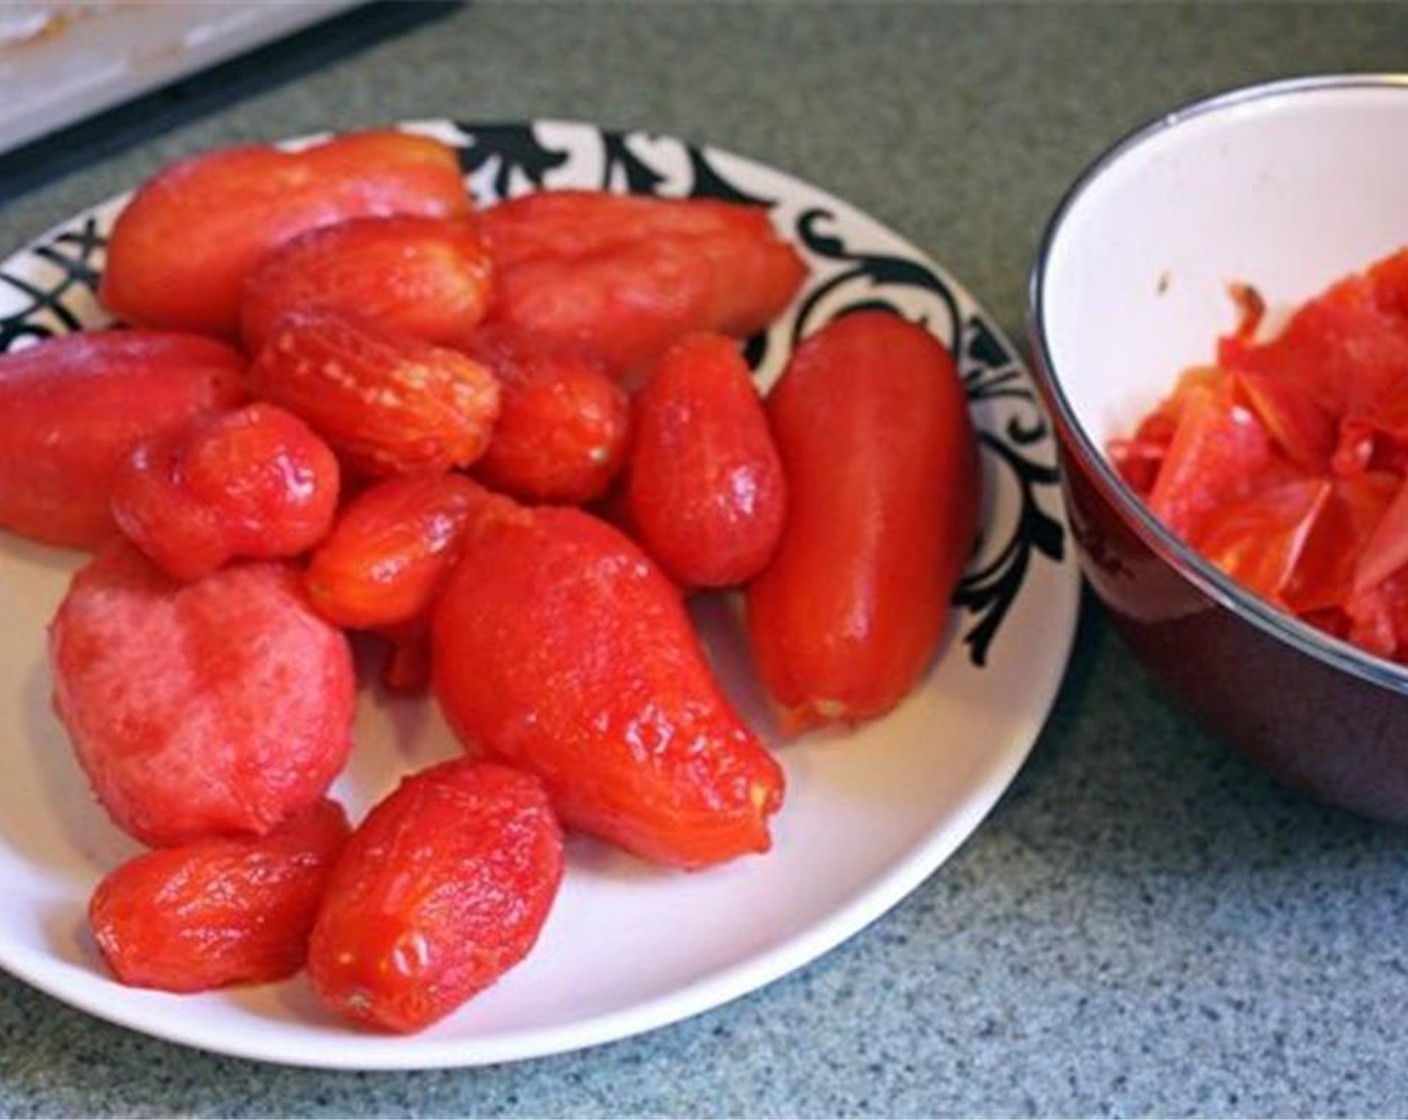 step 5 Peel off all the skin from each of the tomatoes and discard.